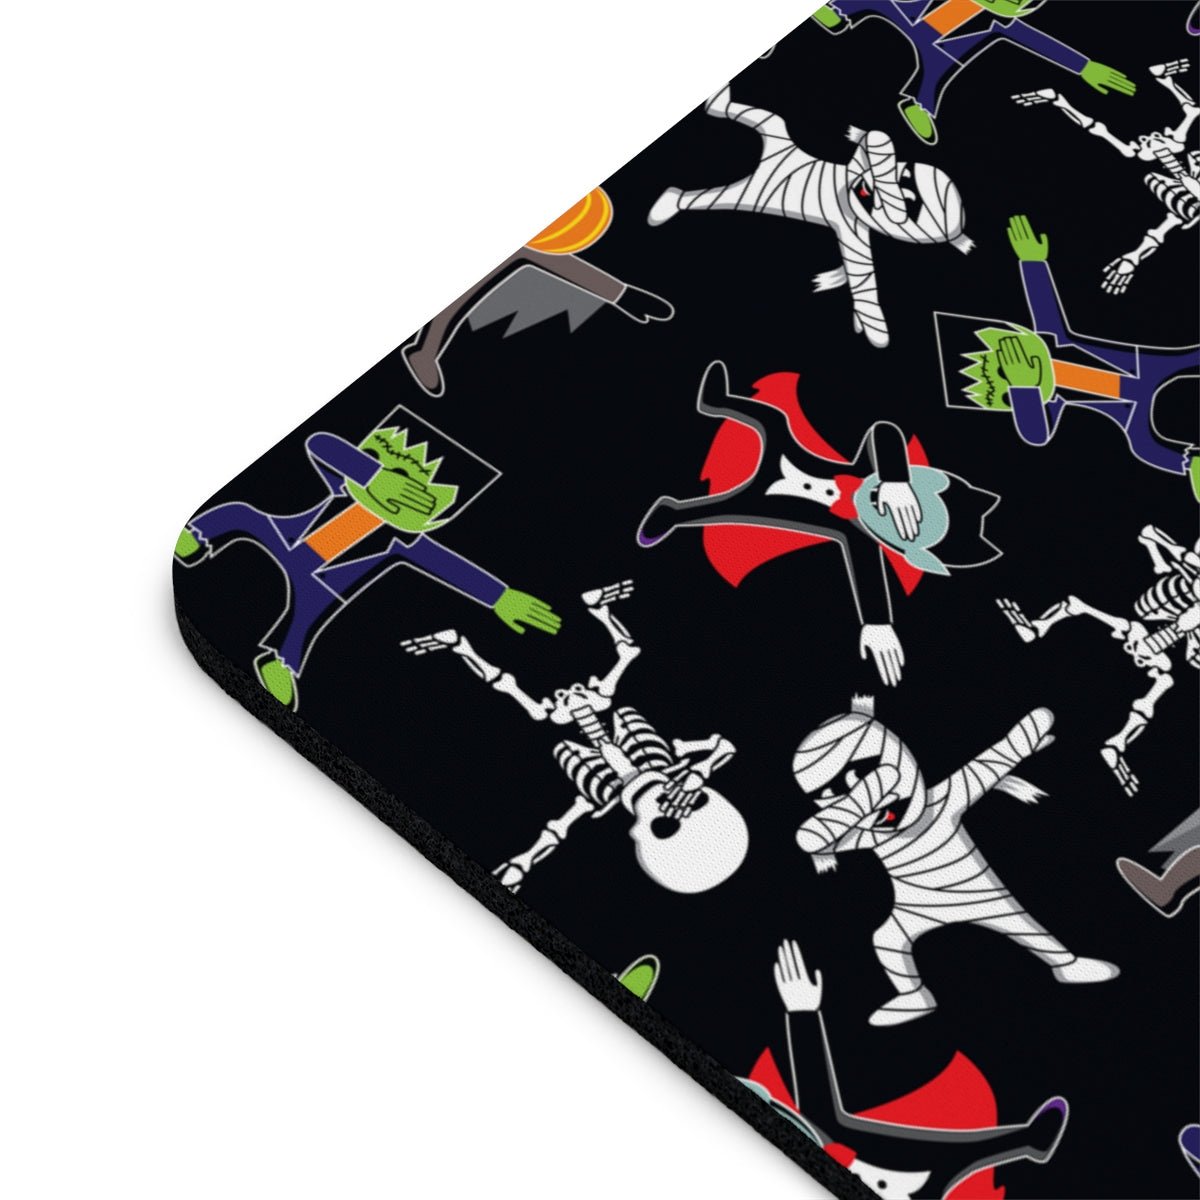 Dancing Halloween Monsters Mouse Pad - Puffin Lime